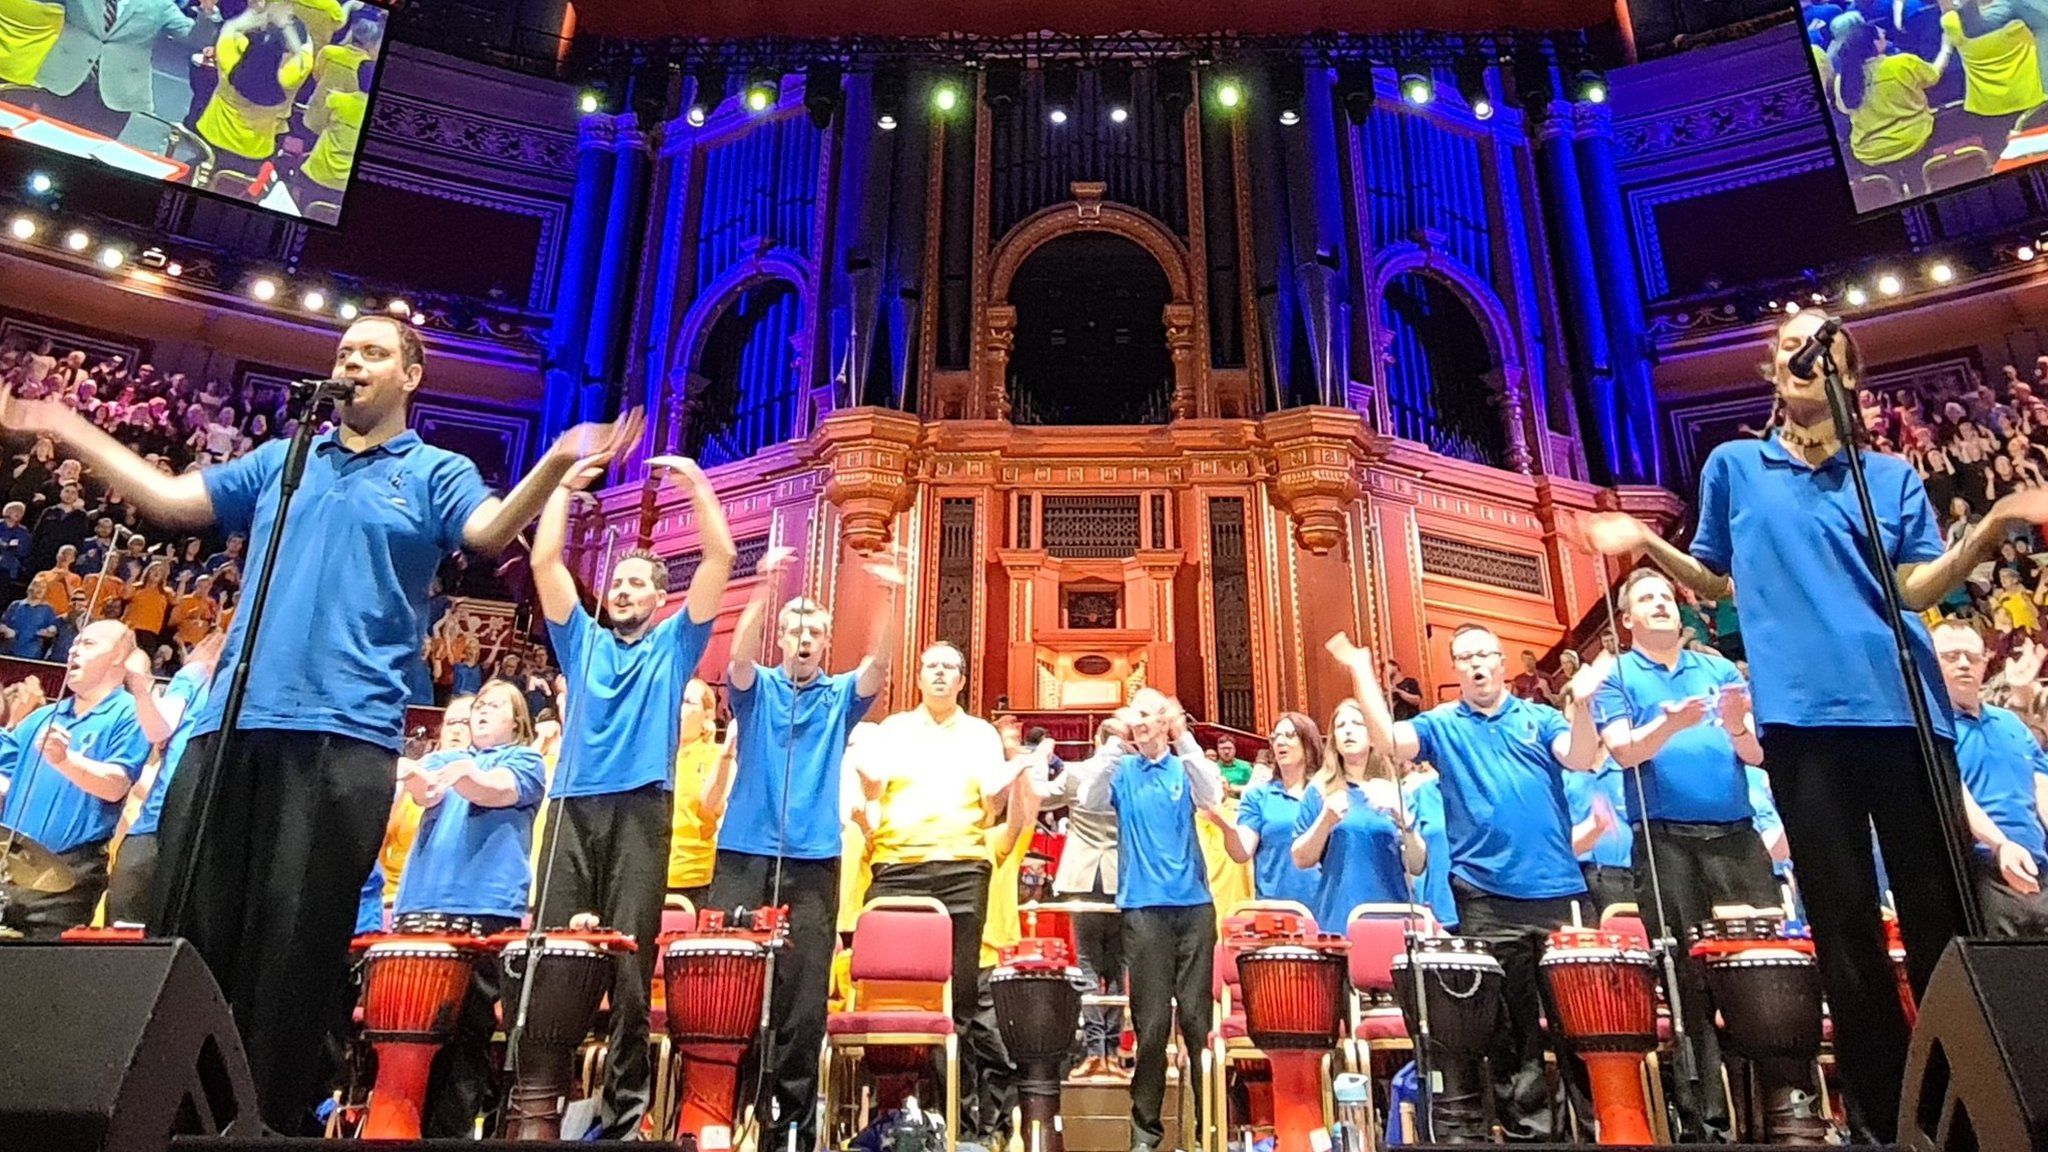 Performers from the Music Man Project on stage at the Royal Albert Hall